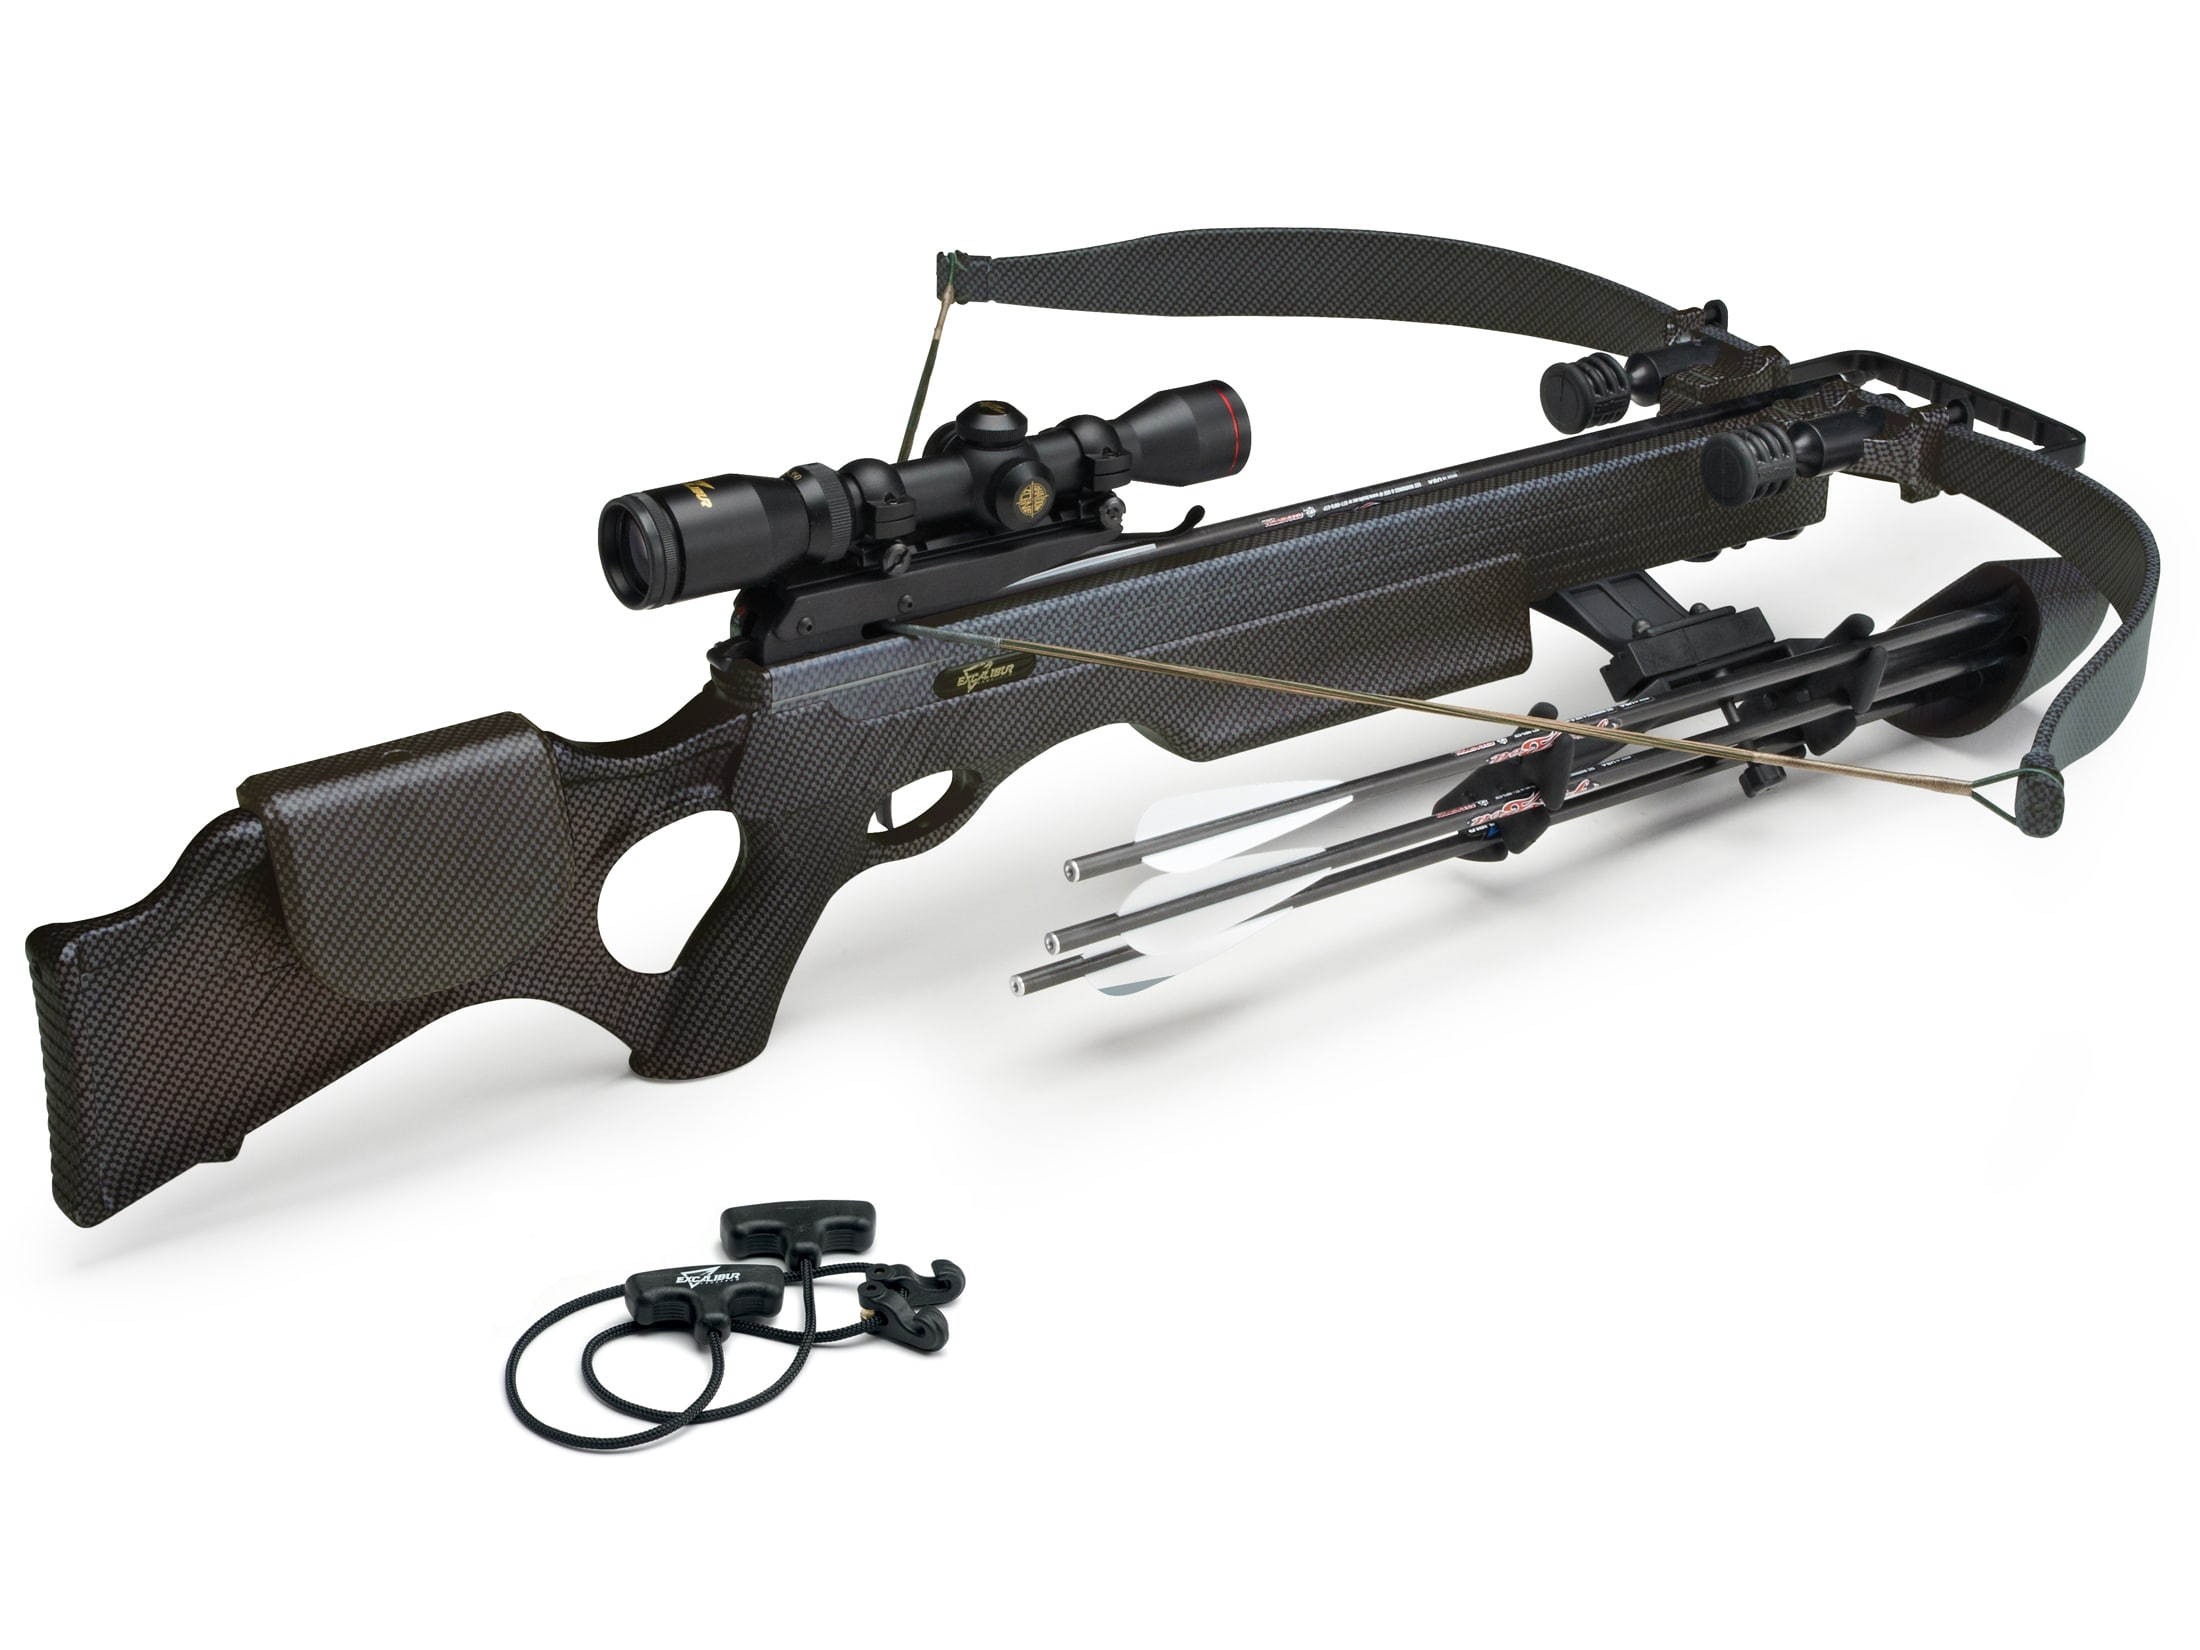 Excalibur Eclipse XT Crossbow Package Shadow-Zone Illuminated Scope.